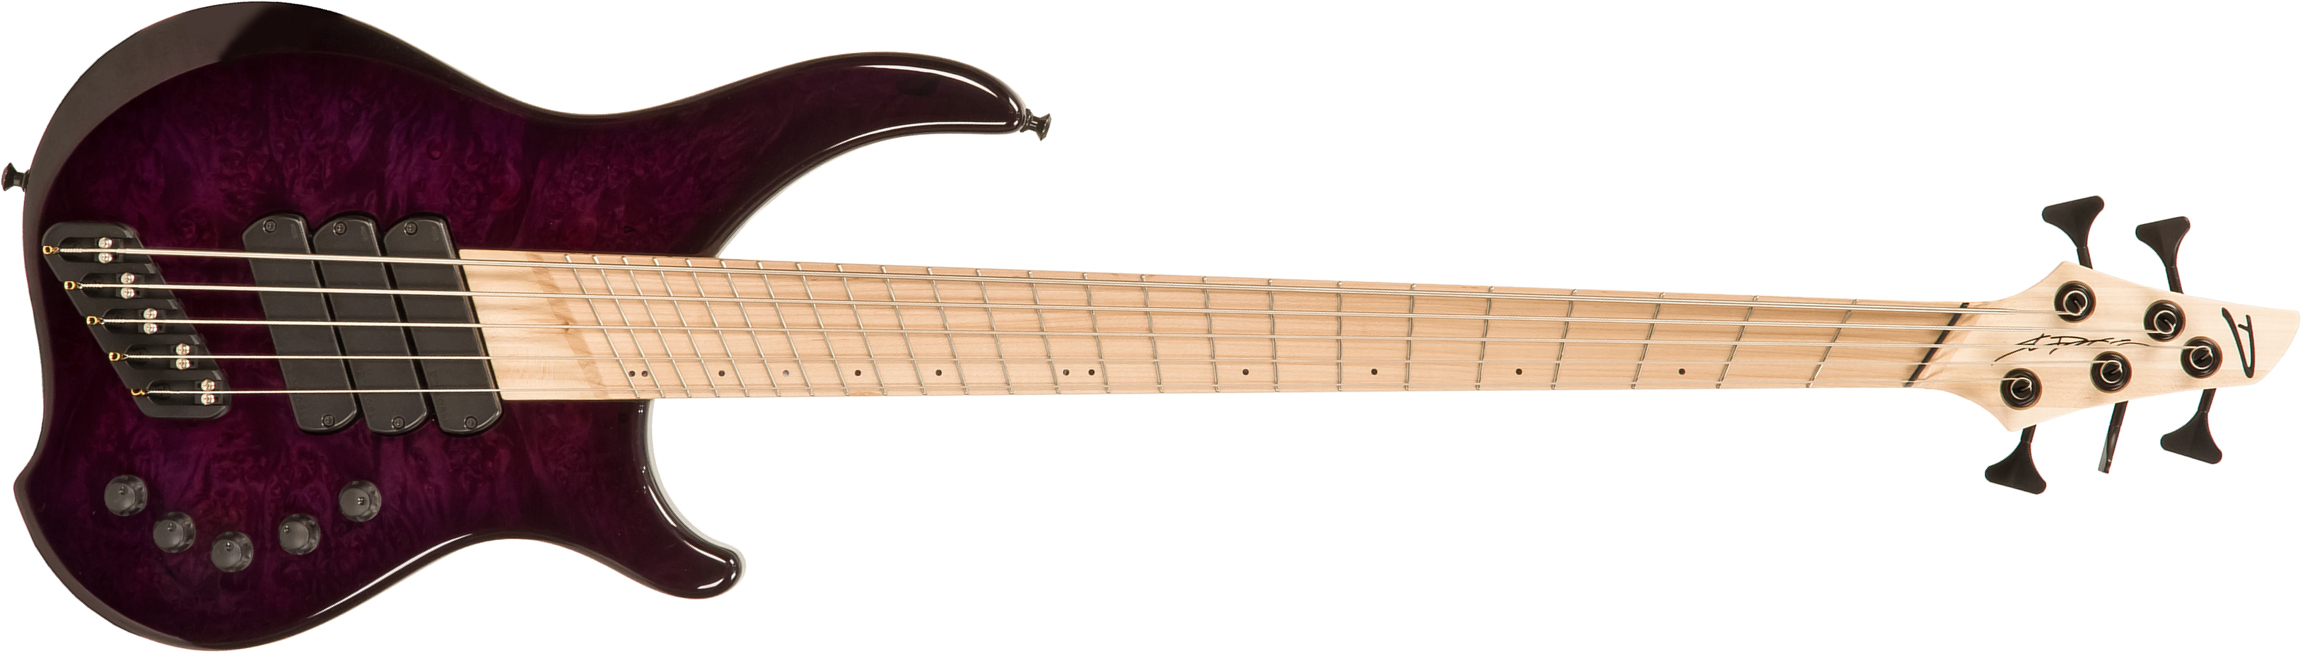 Dingwall Afterburner I 5 3-pickups Mn - Faded Purple Burst - Solidbody E-bass - Main picture